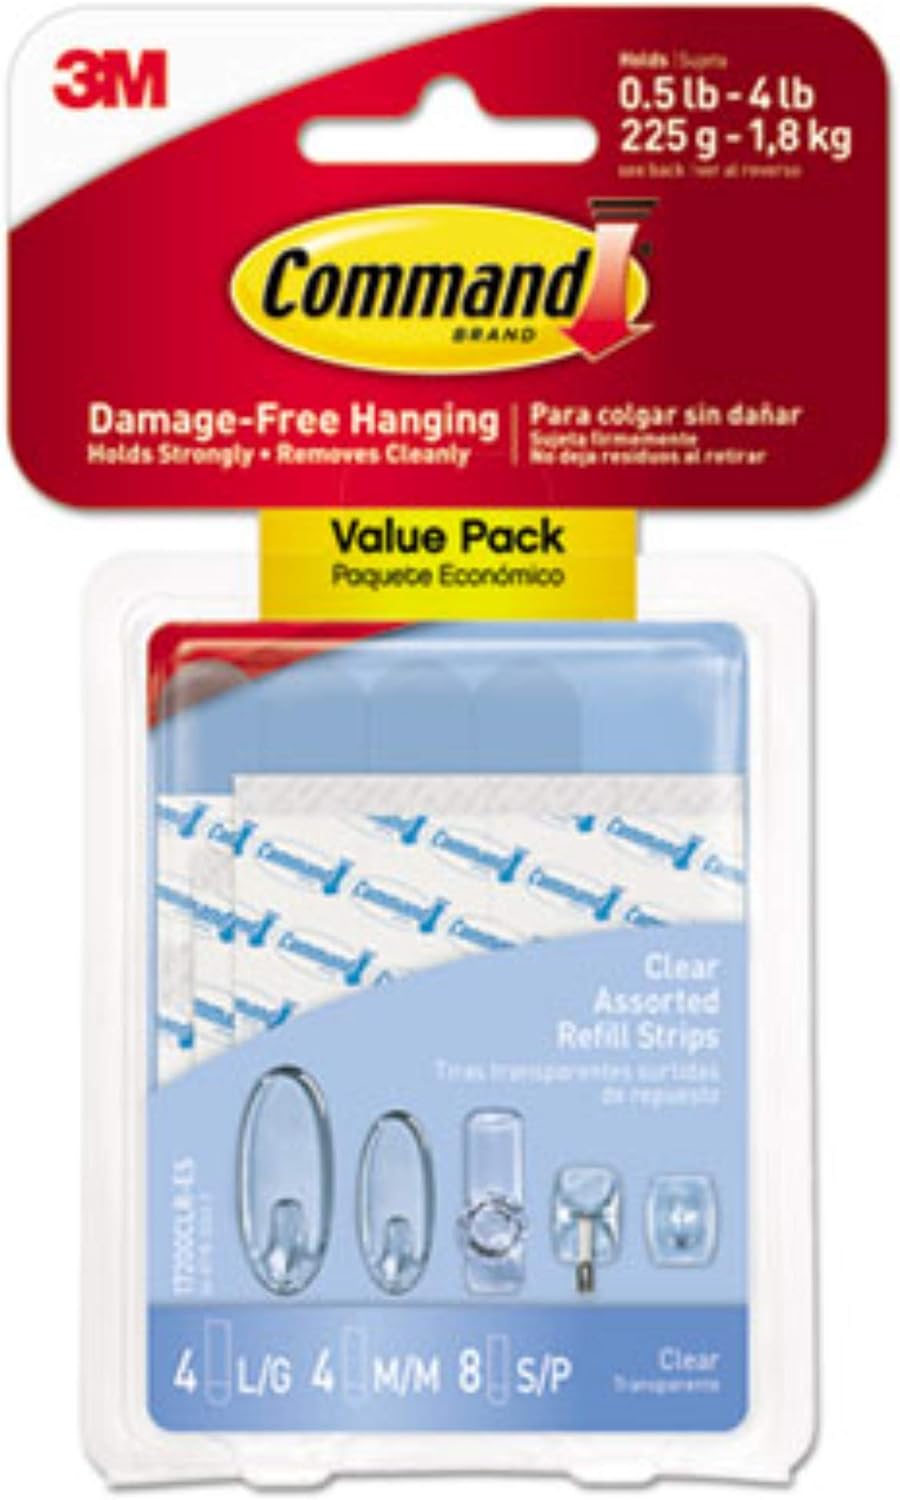 Command Strips 17200CLR Clear Assorted Refill Strips 16 Count